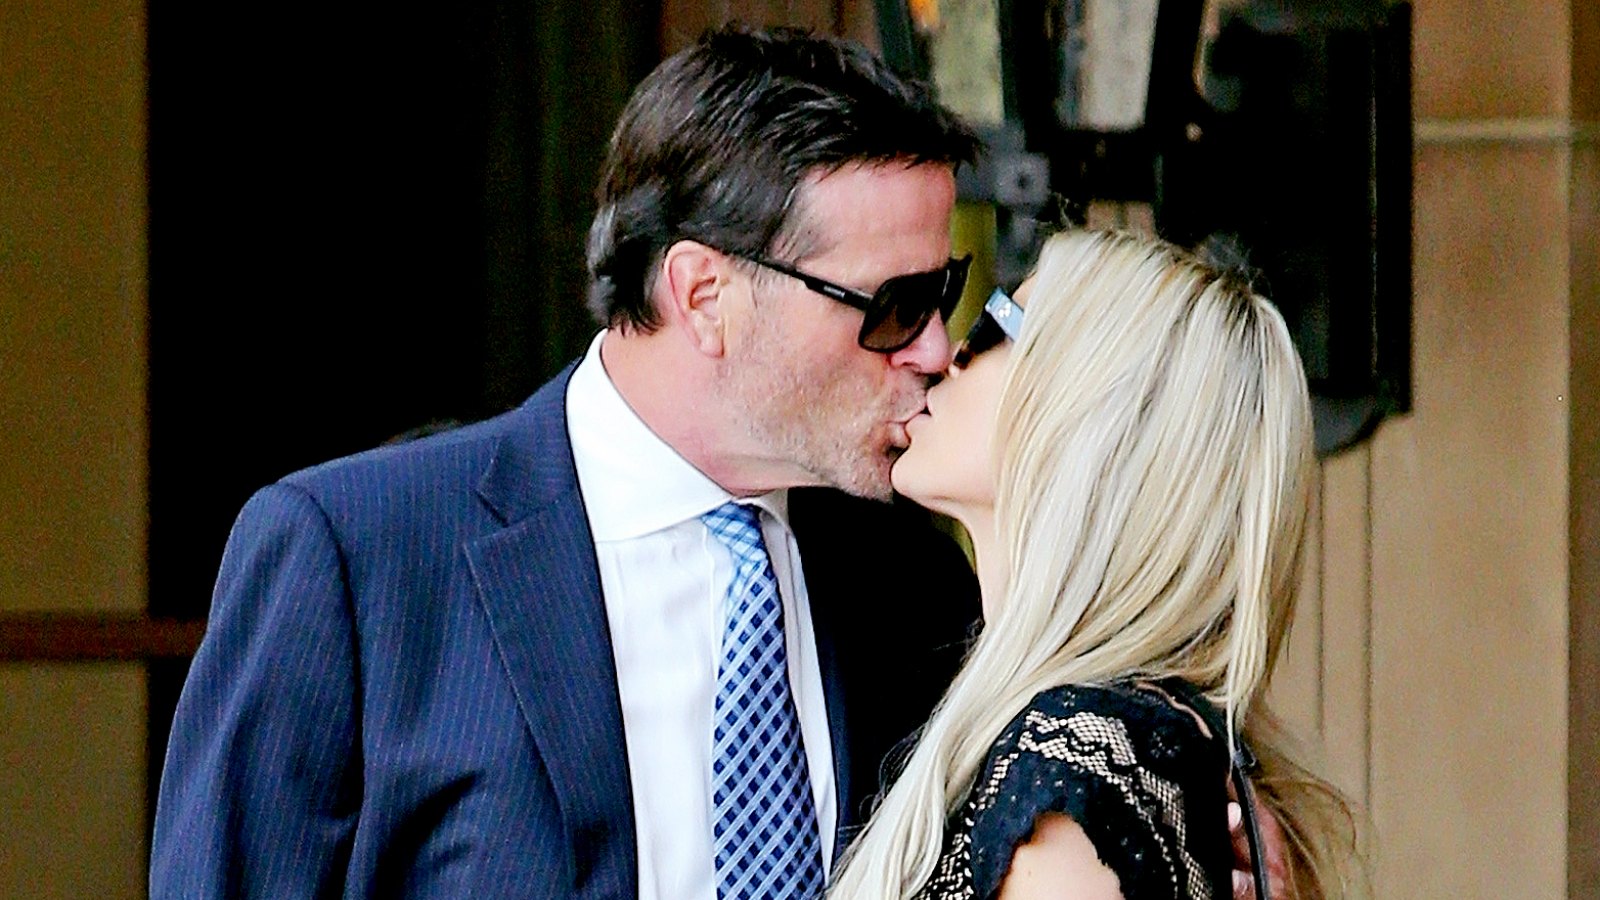 Christina El Moussa celebrates her birthday with a kiss from boyfriend Doug Spedding at the Montage hotel in the 90210.